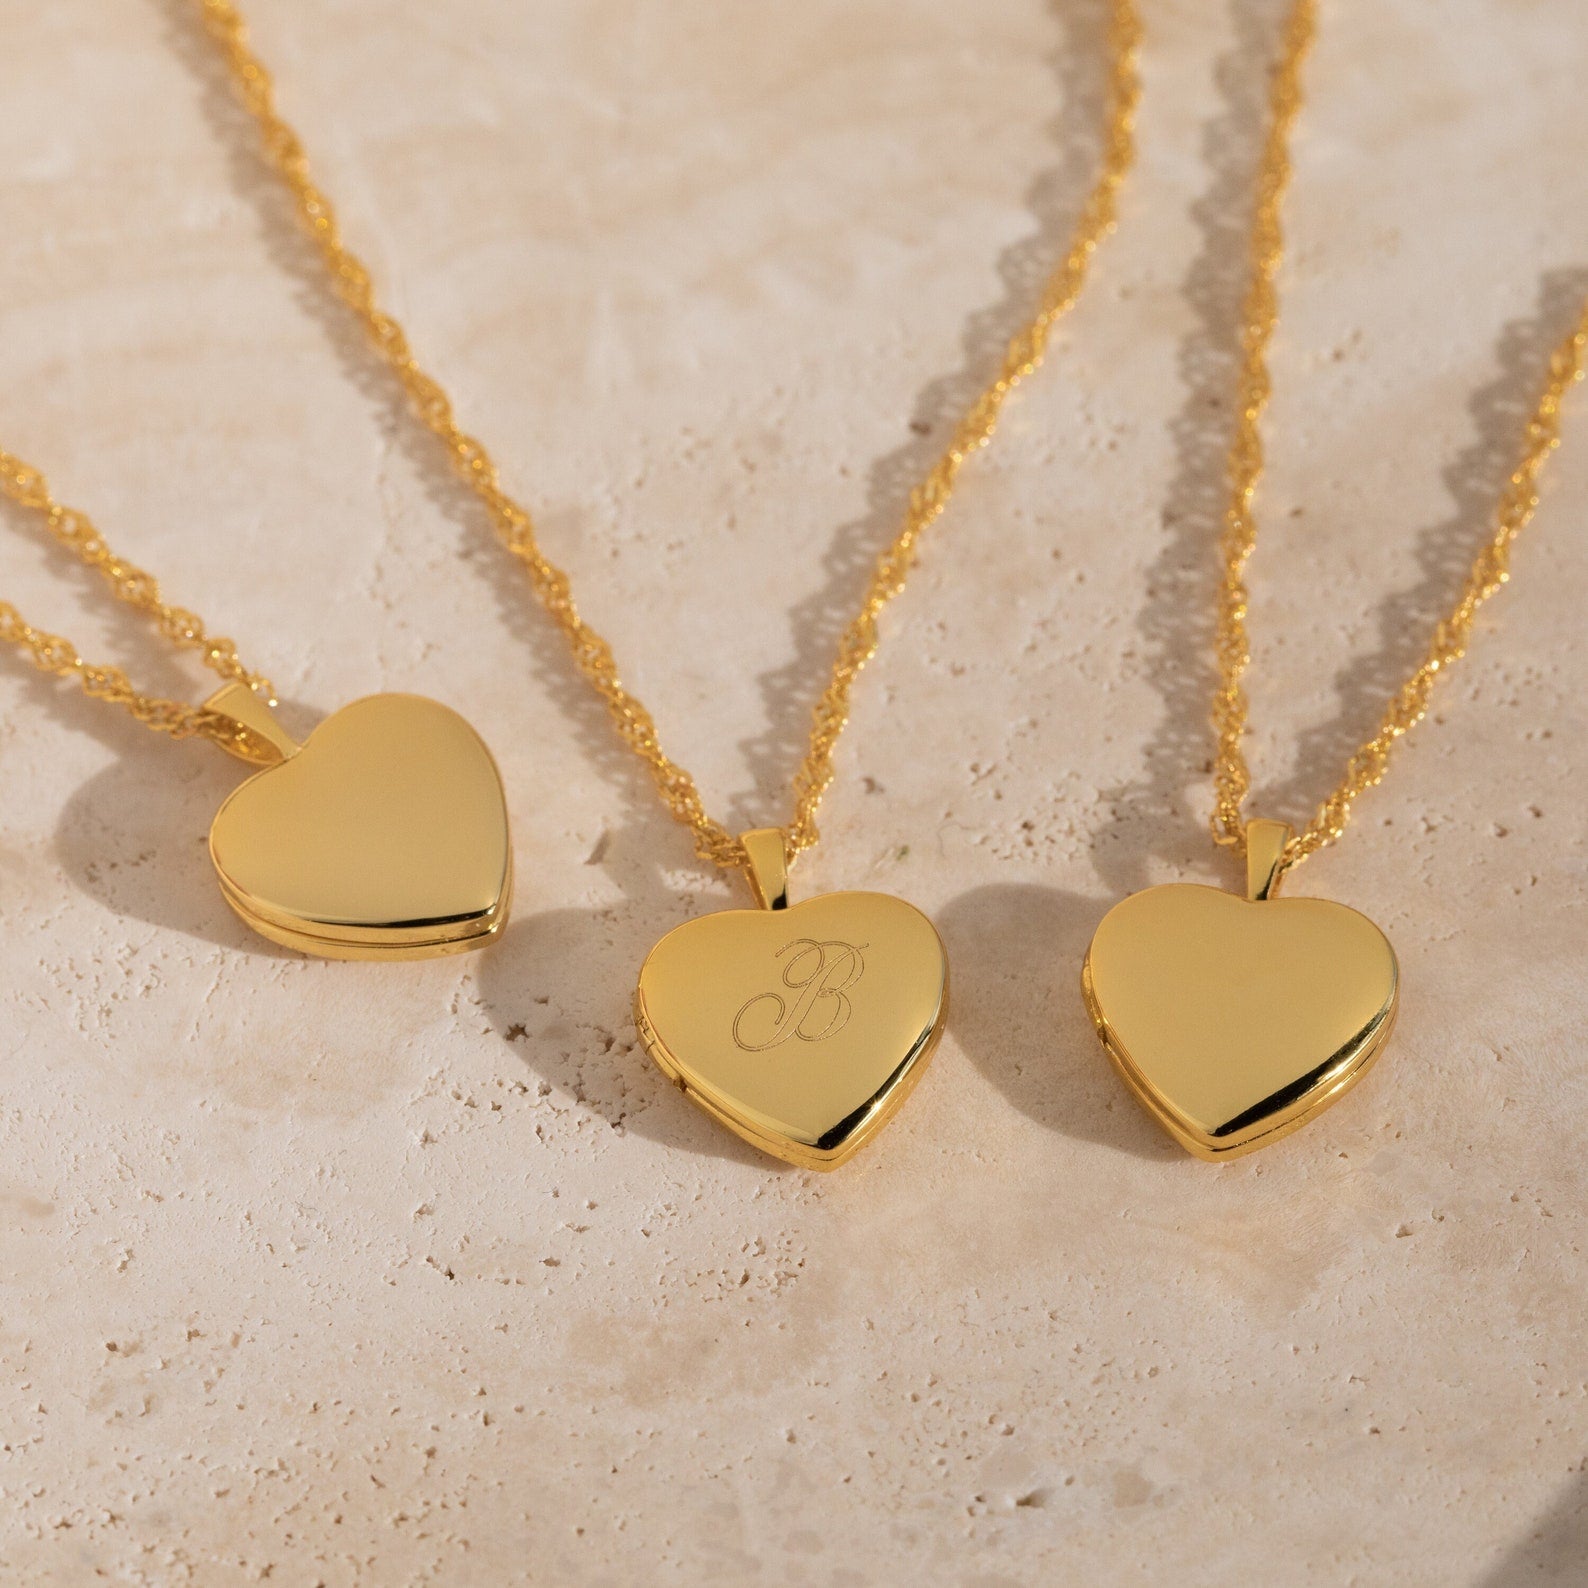 Engraved Initial Heart Photo Locket Necklace